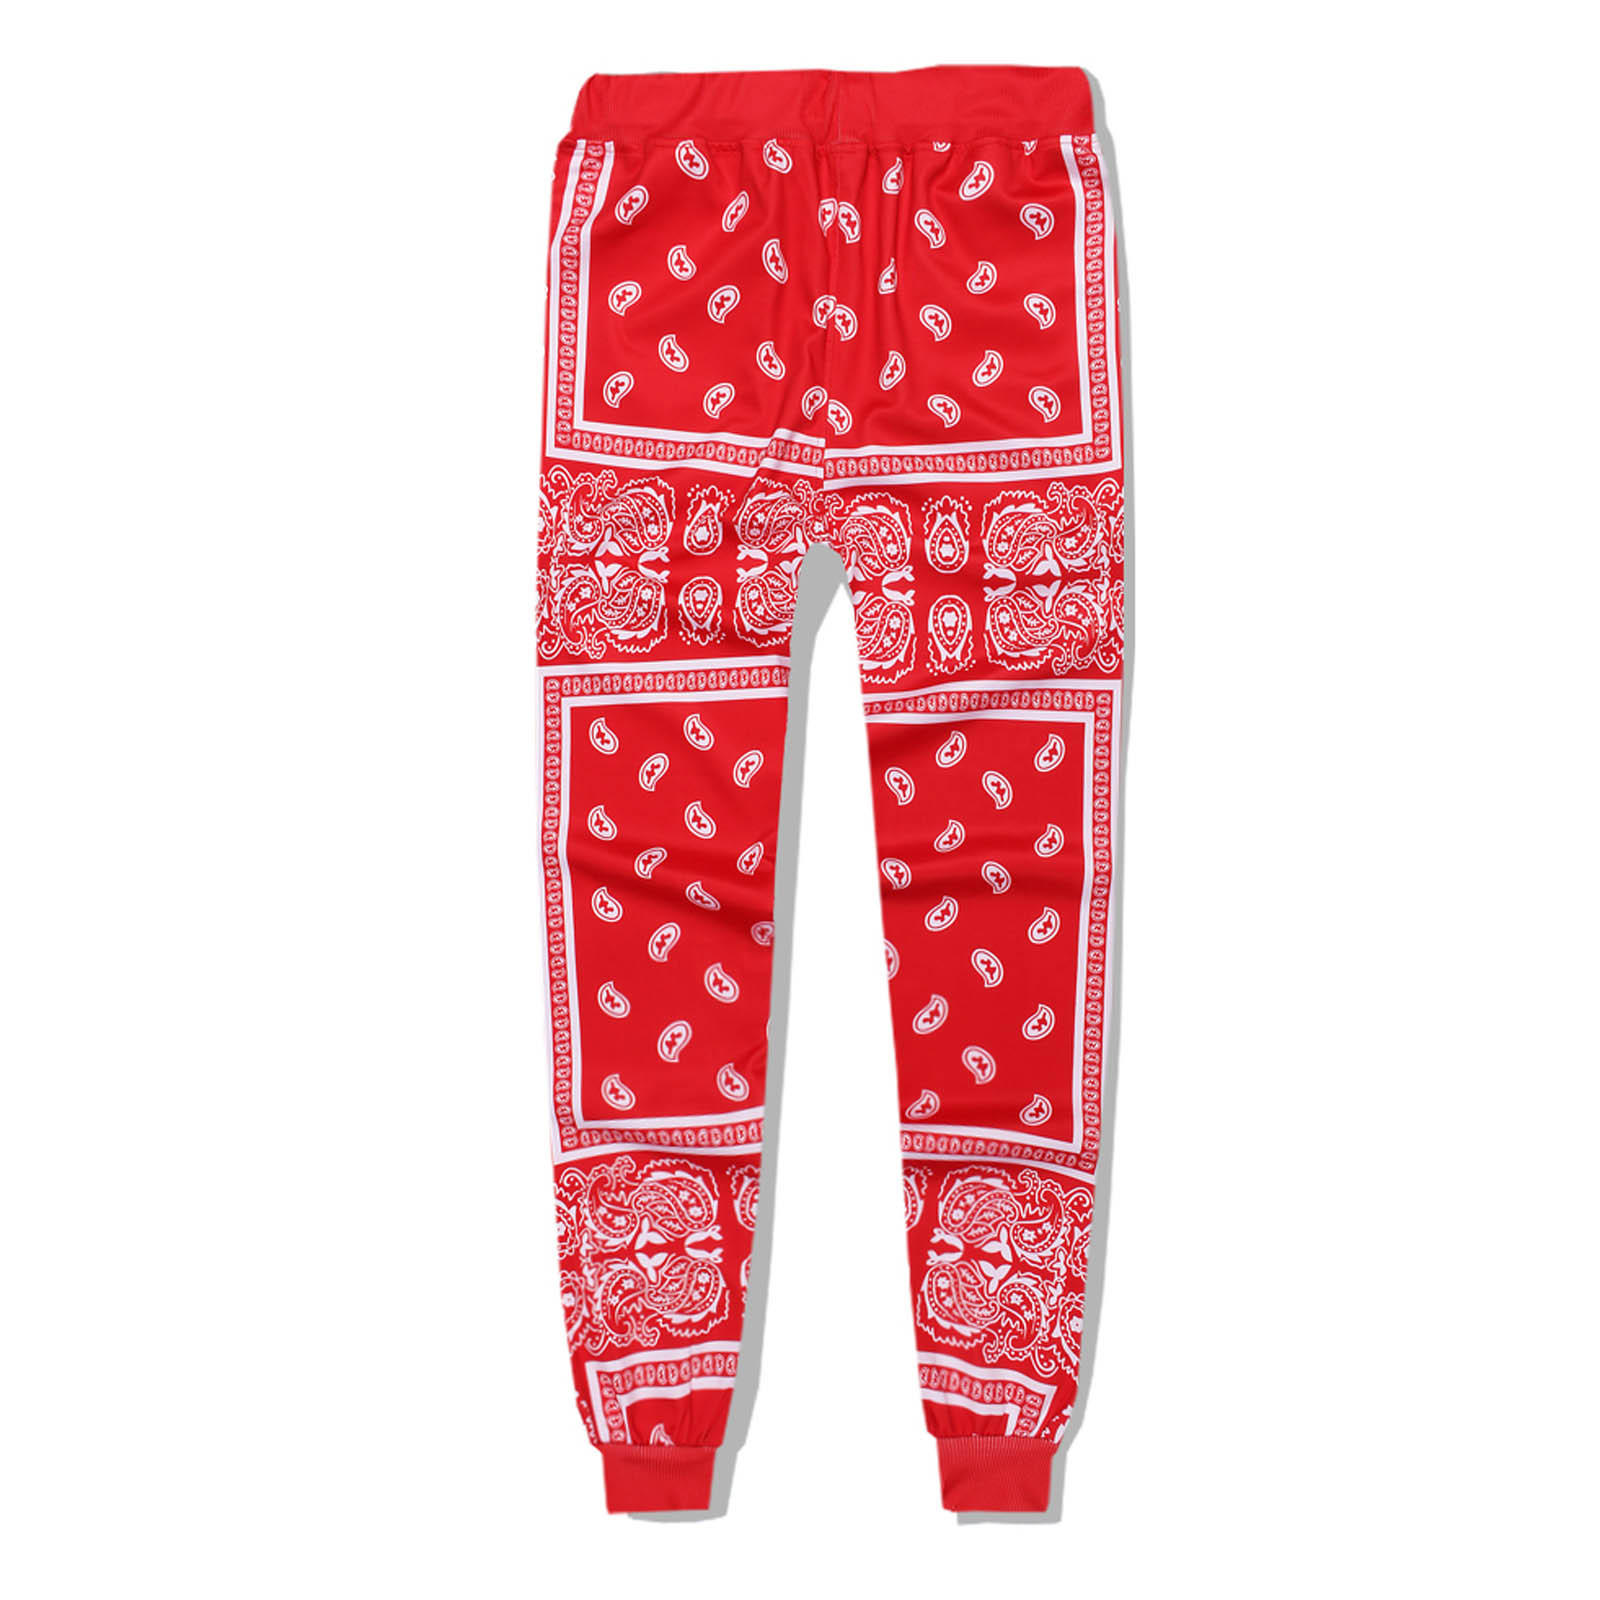 Vsssj Men's Cuff Pants Slim Fit Ethnic Print Drawstring Elastic Waist Straight Trousers with Pocket Casual Stretchy Breathable Sport Long Pants Red L